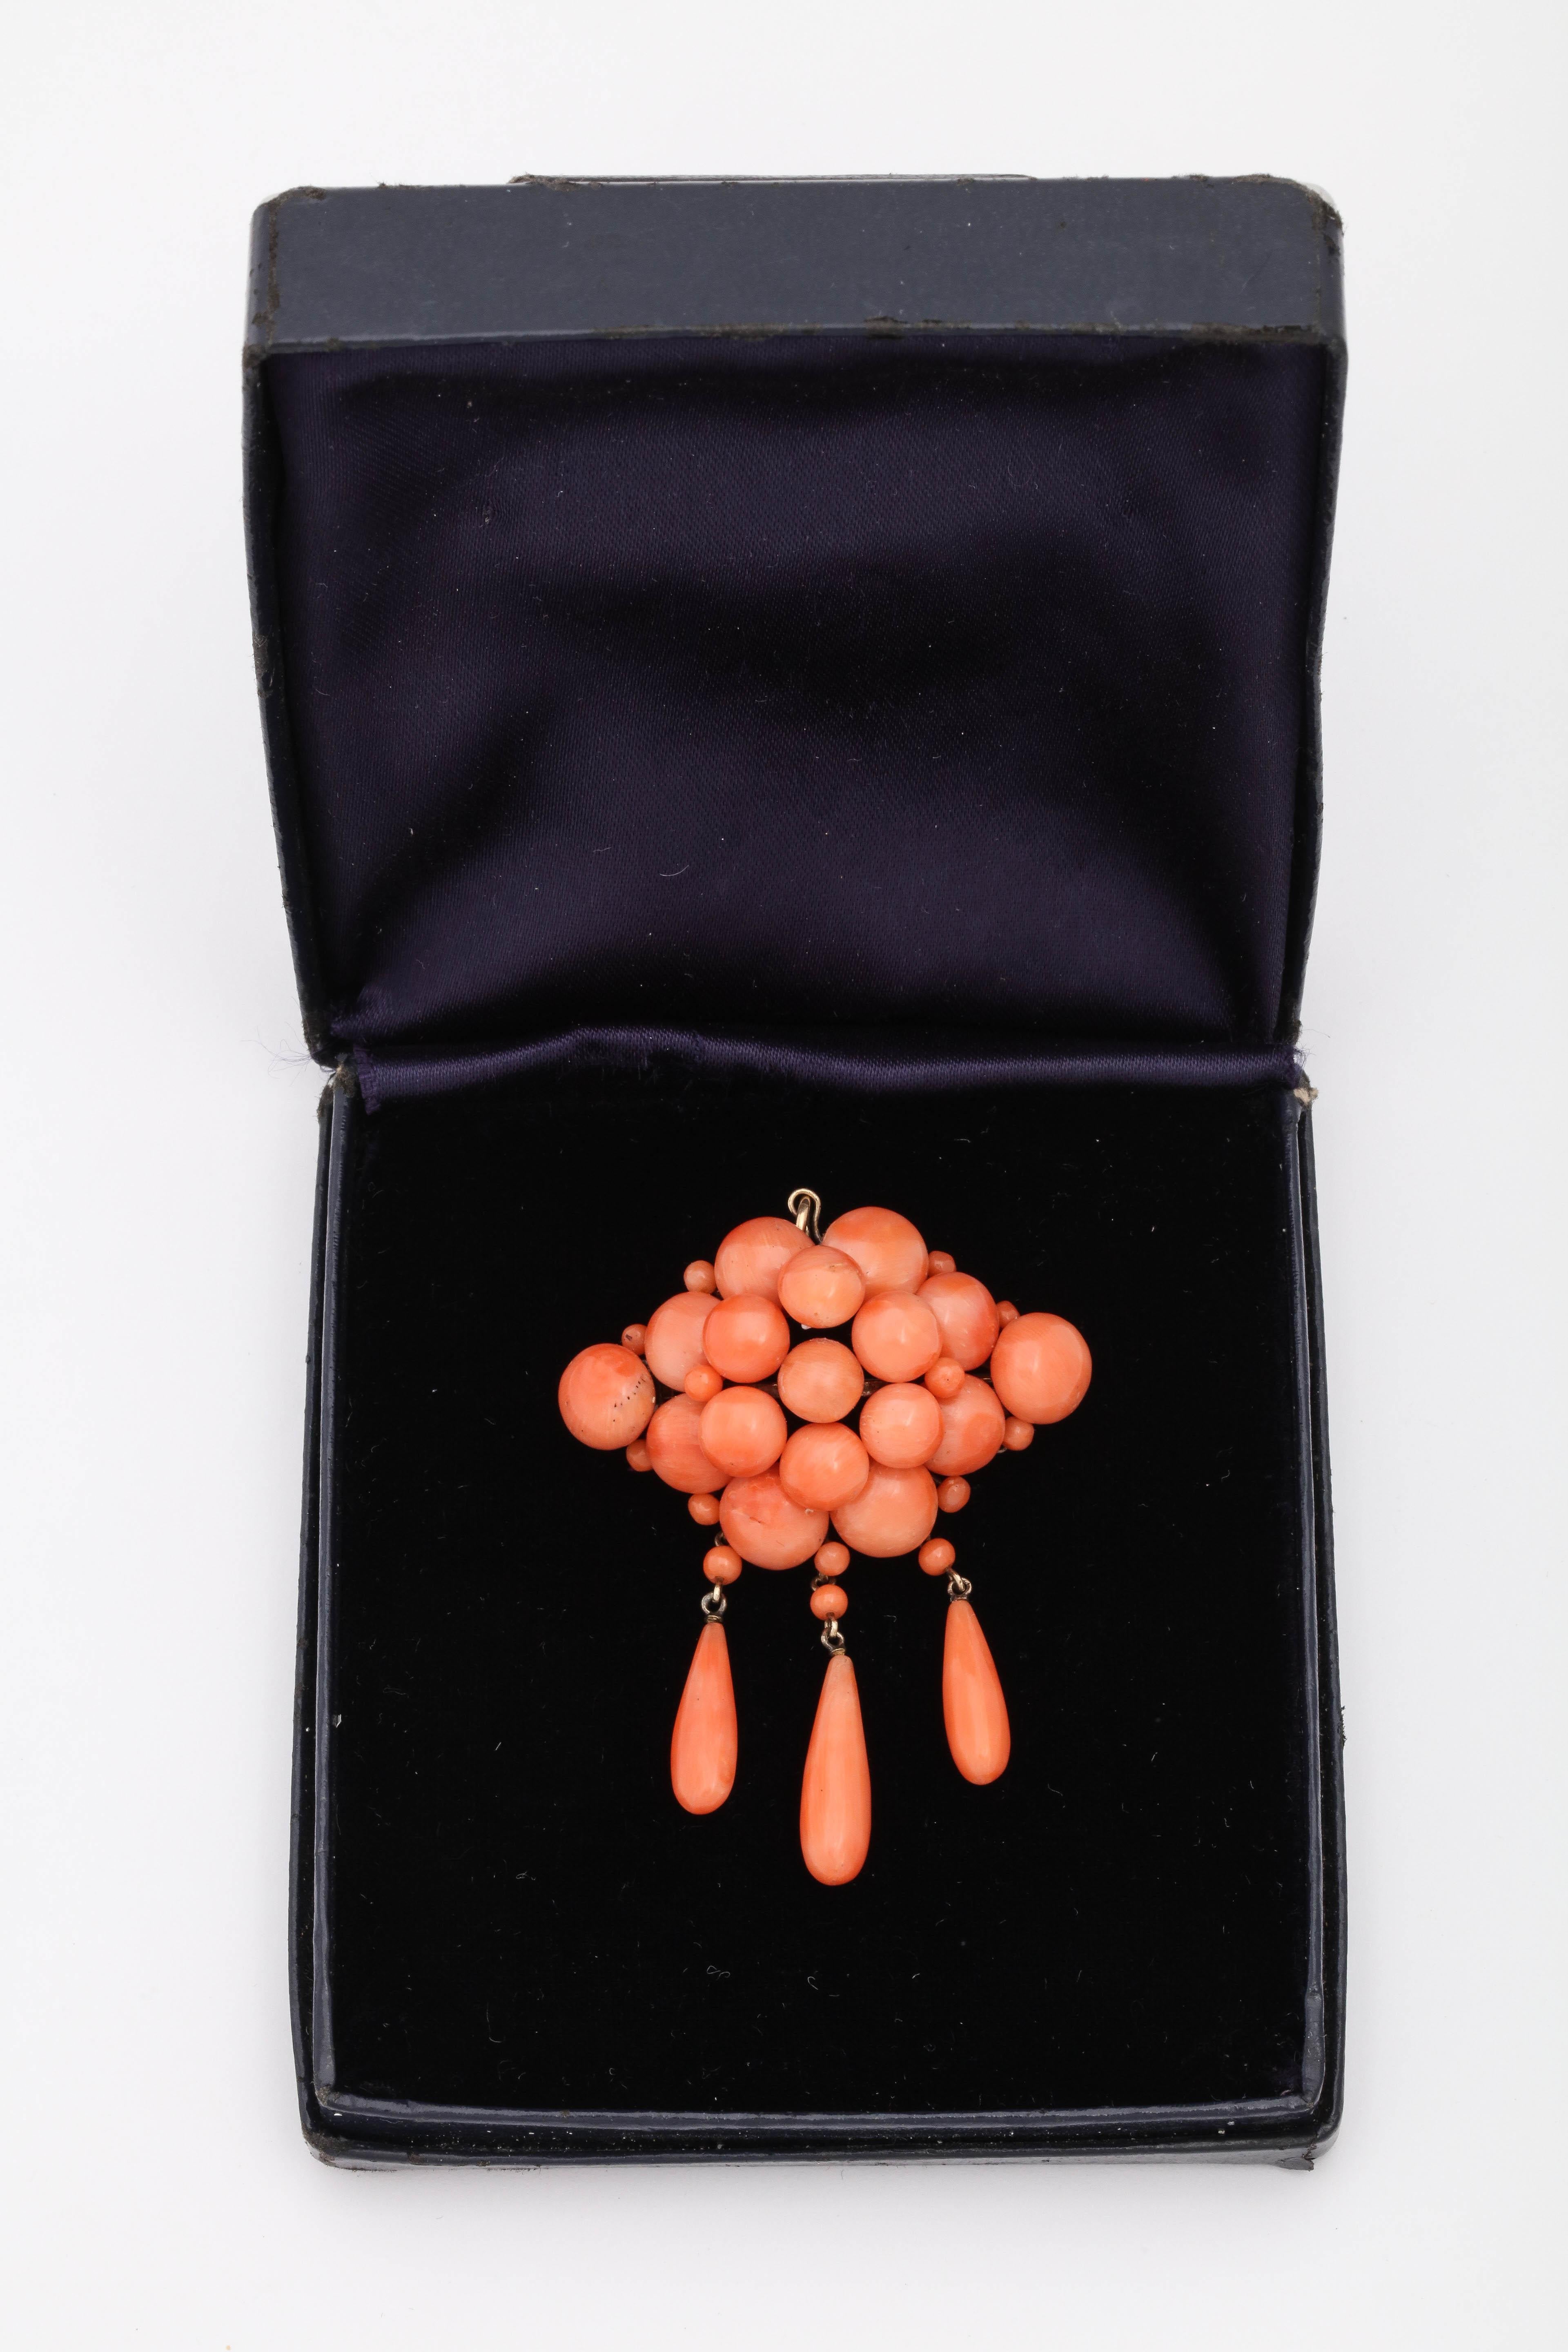 One ladies 14kt Gold Pendant And Brooch Combination Created With Numerous Button Style Corals And With Three Teardrop Shaped Dangle Corals. Created In The 1880's In The United States Of America.